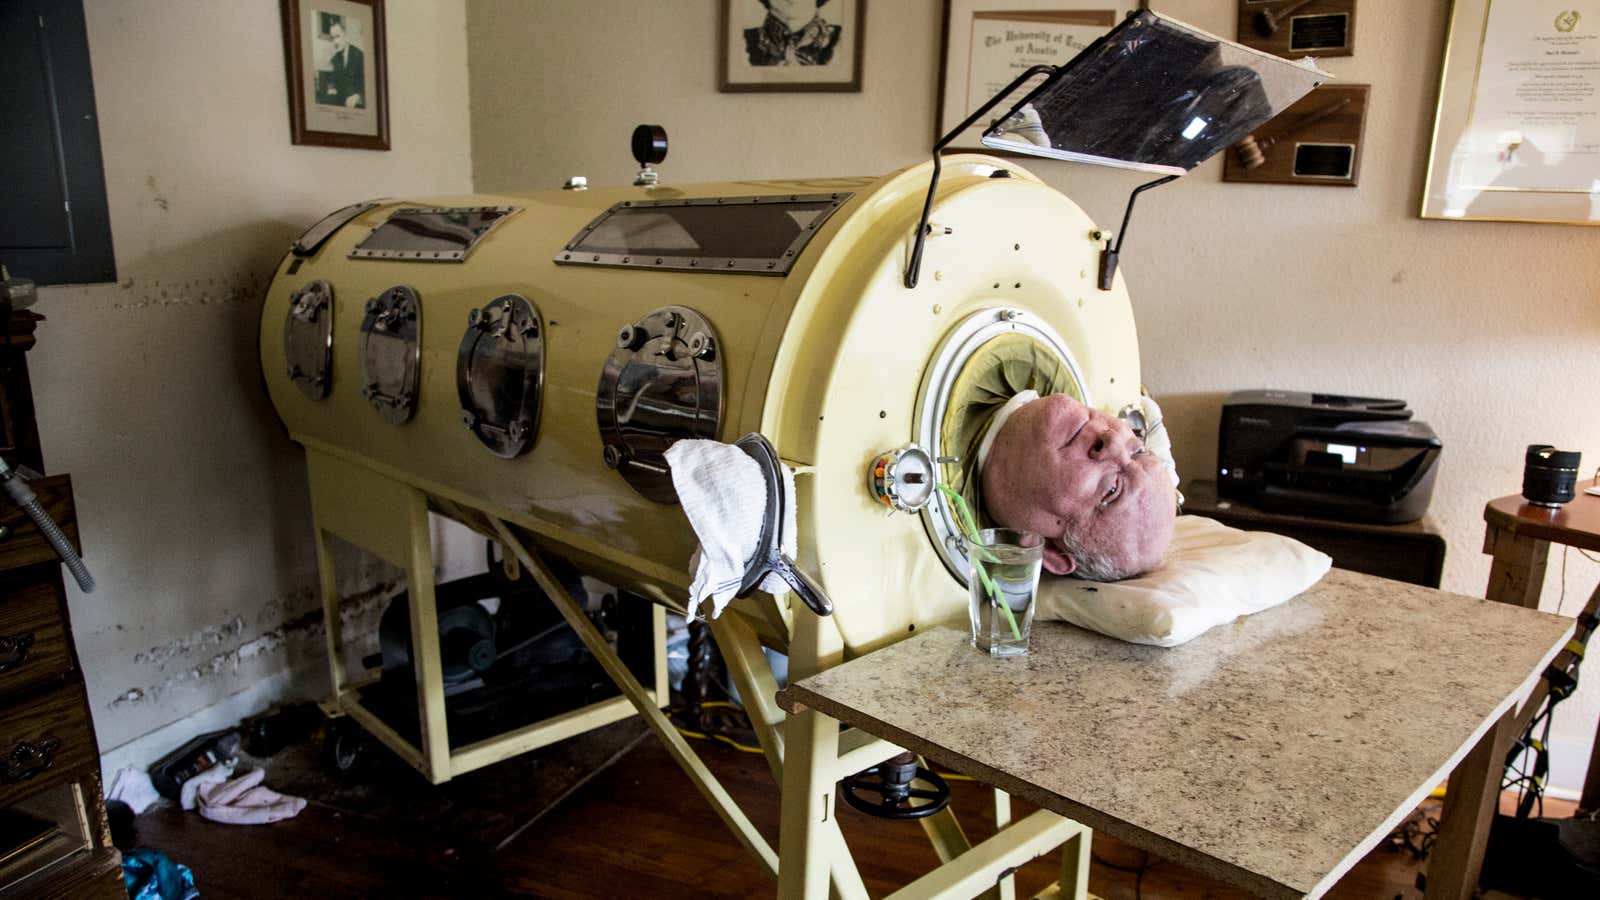 Paul Alexander spends almost every moment of the day inside his iron lung. Photo: Jennings Brown for Gizmodo